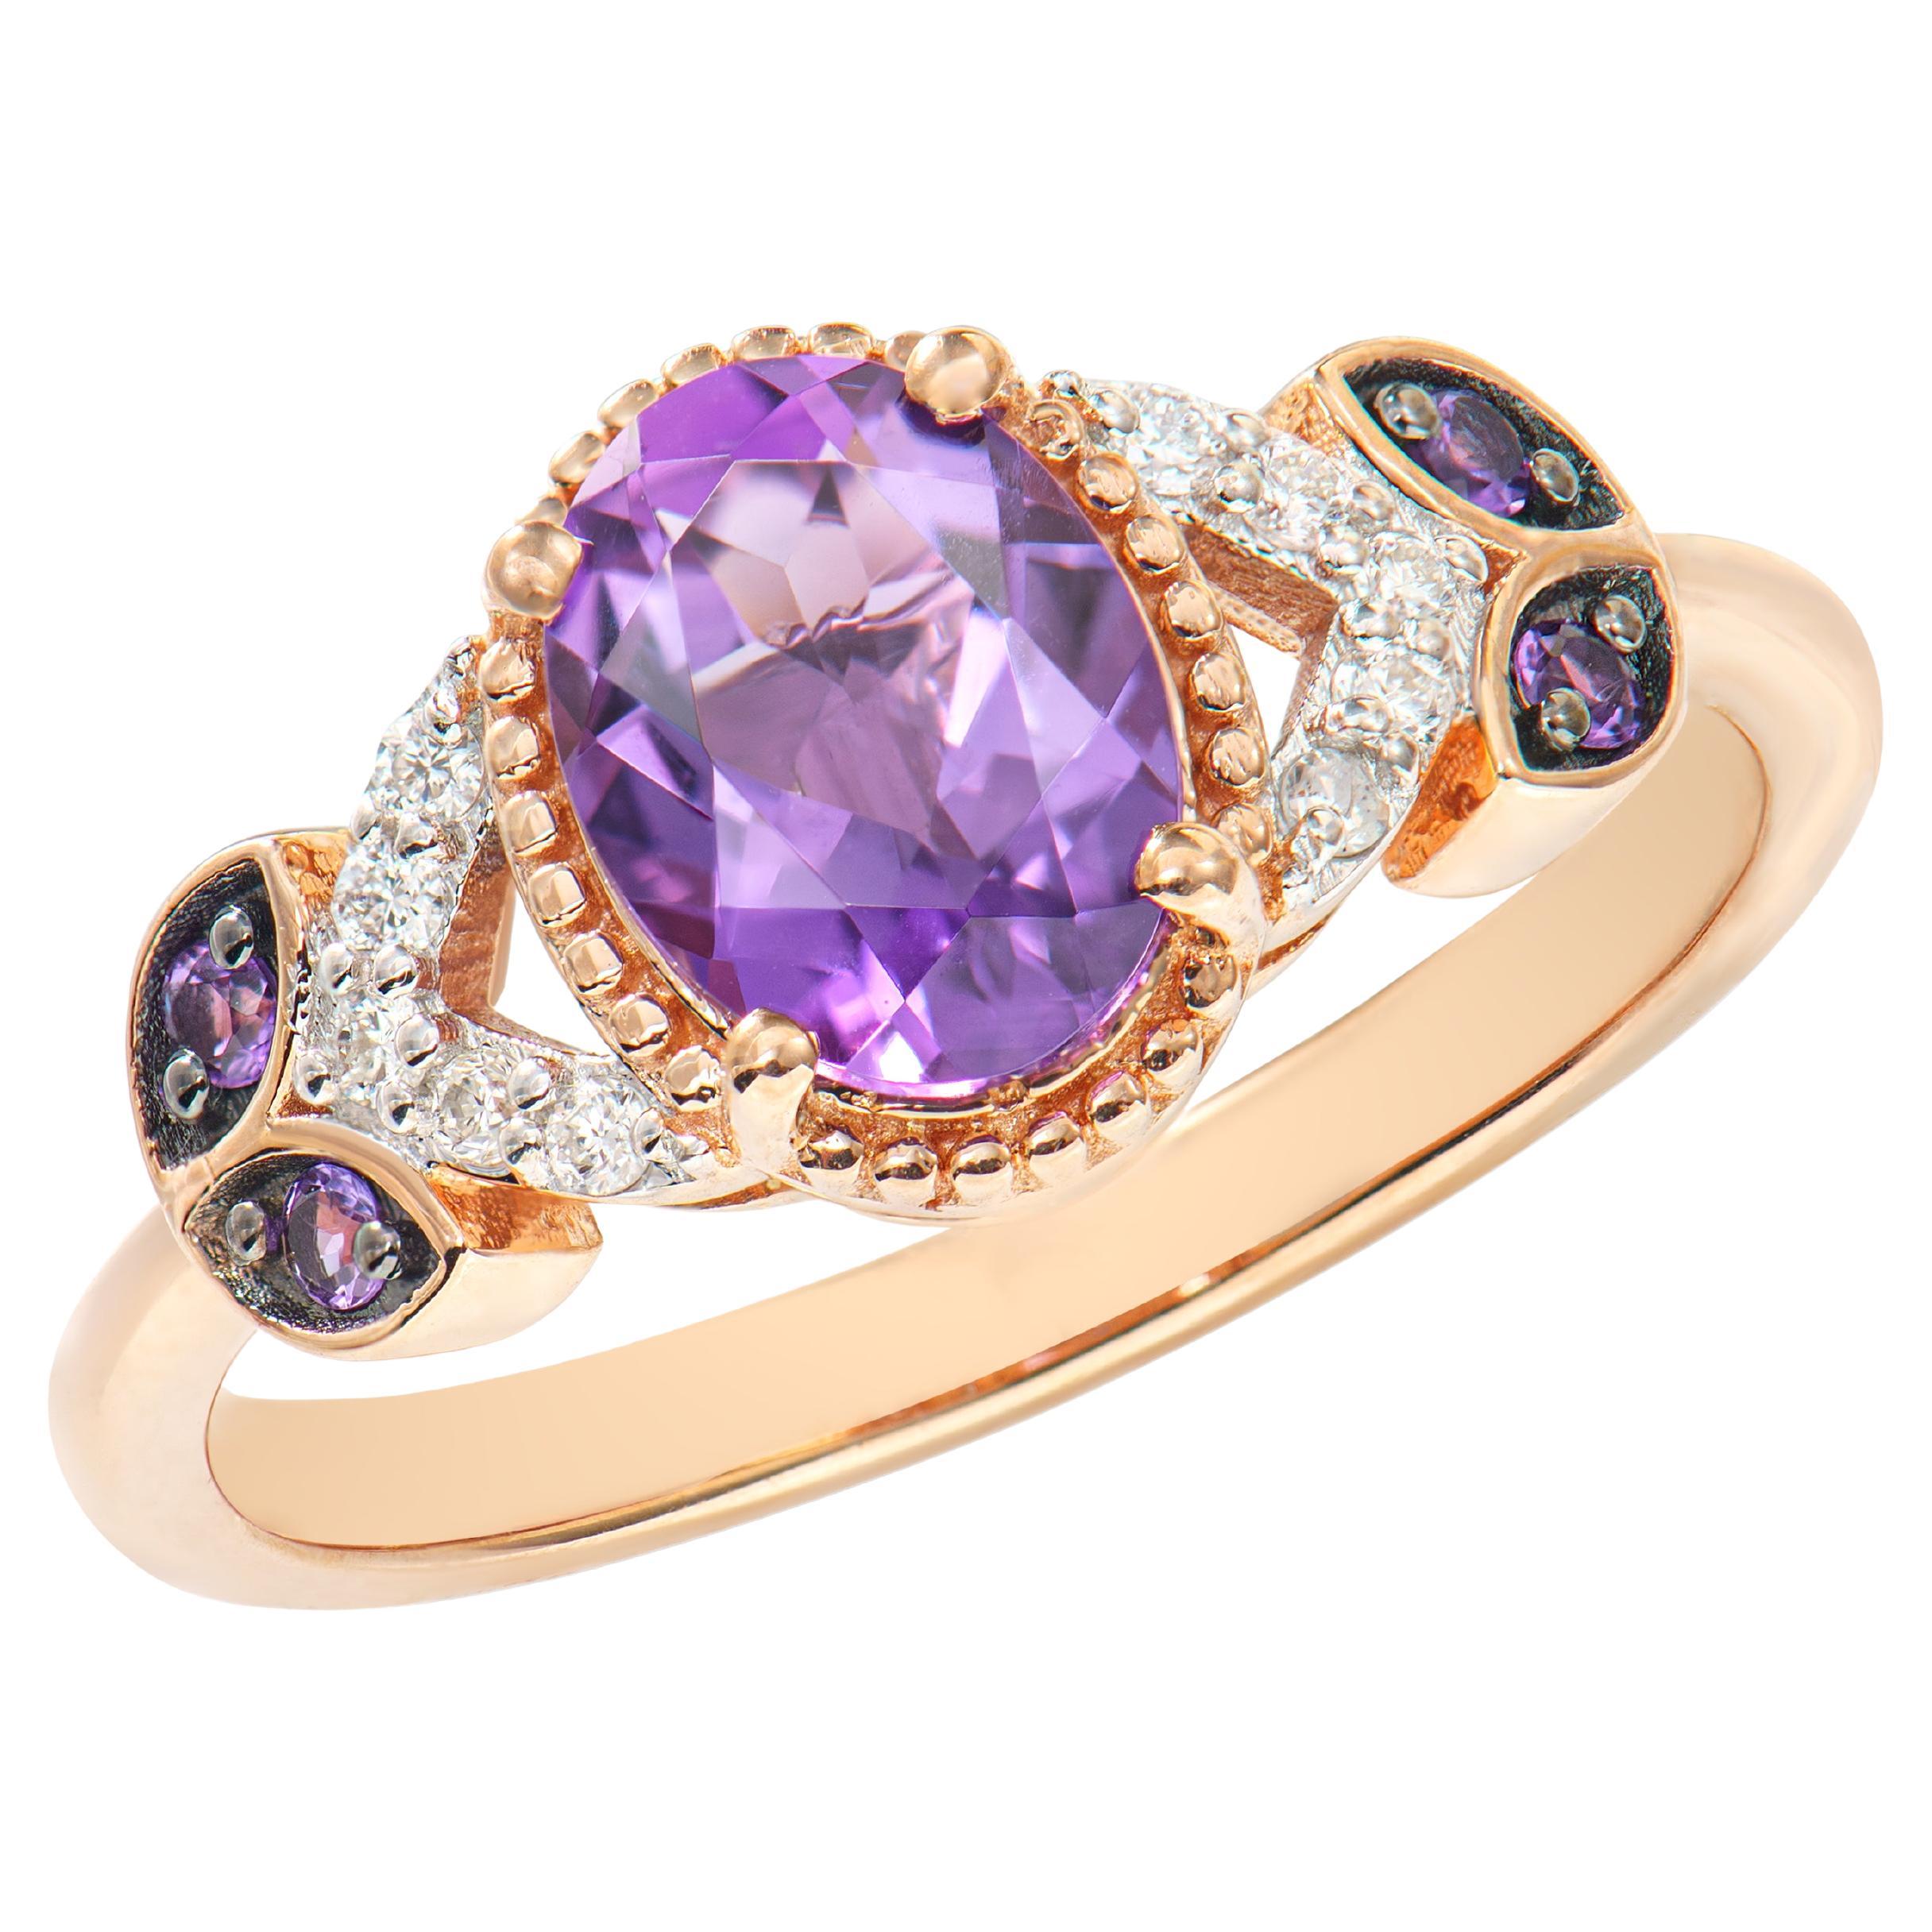 1.02 Carat Amethyst Fancy Ring in 14Karat Rose Gold with White Diamond.   For Sale